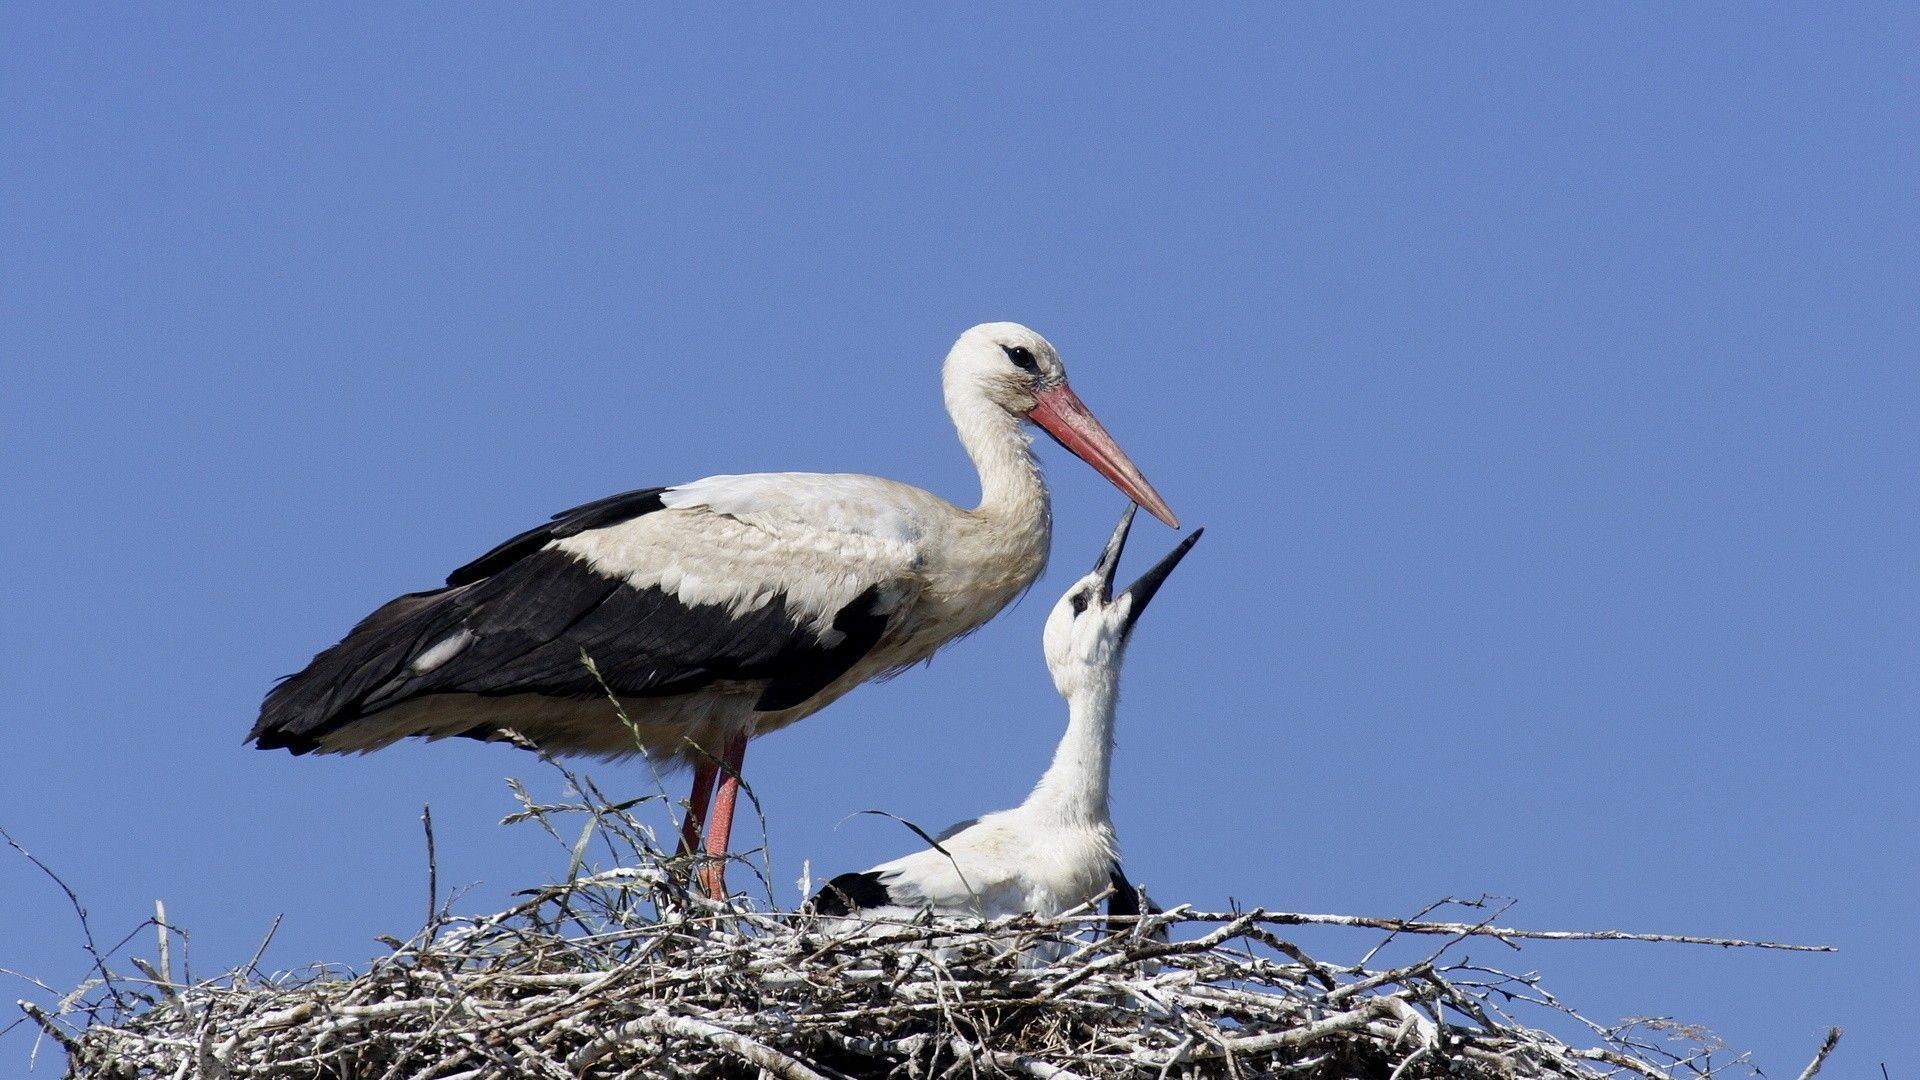 Explore stork wallpapers, Desktop, mobile, and tablet, Wide range of options, High-quality imagery, 1920x1080 Full HD Desktop